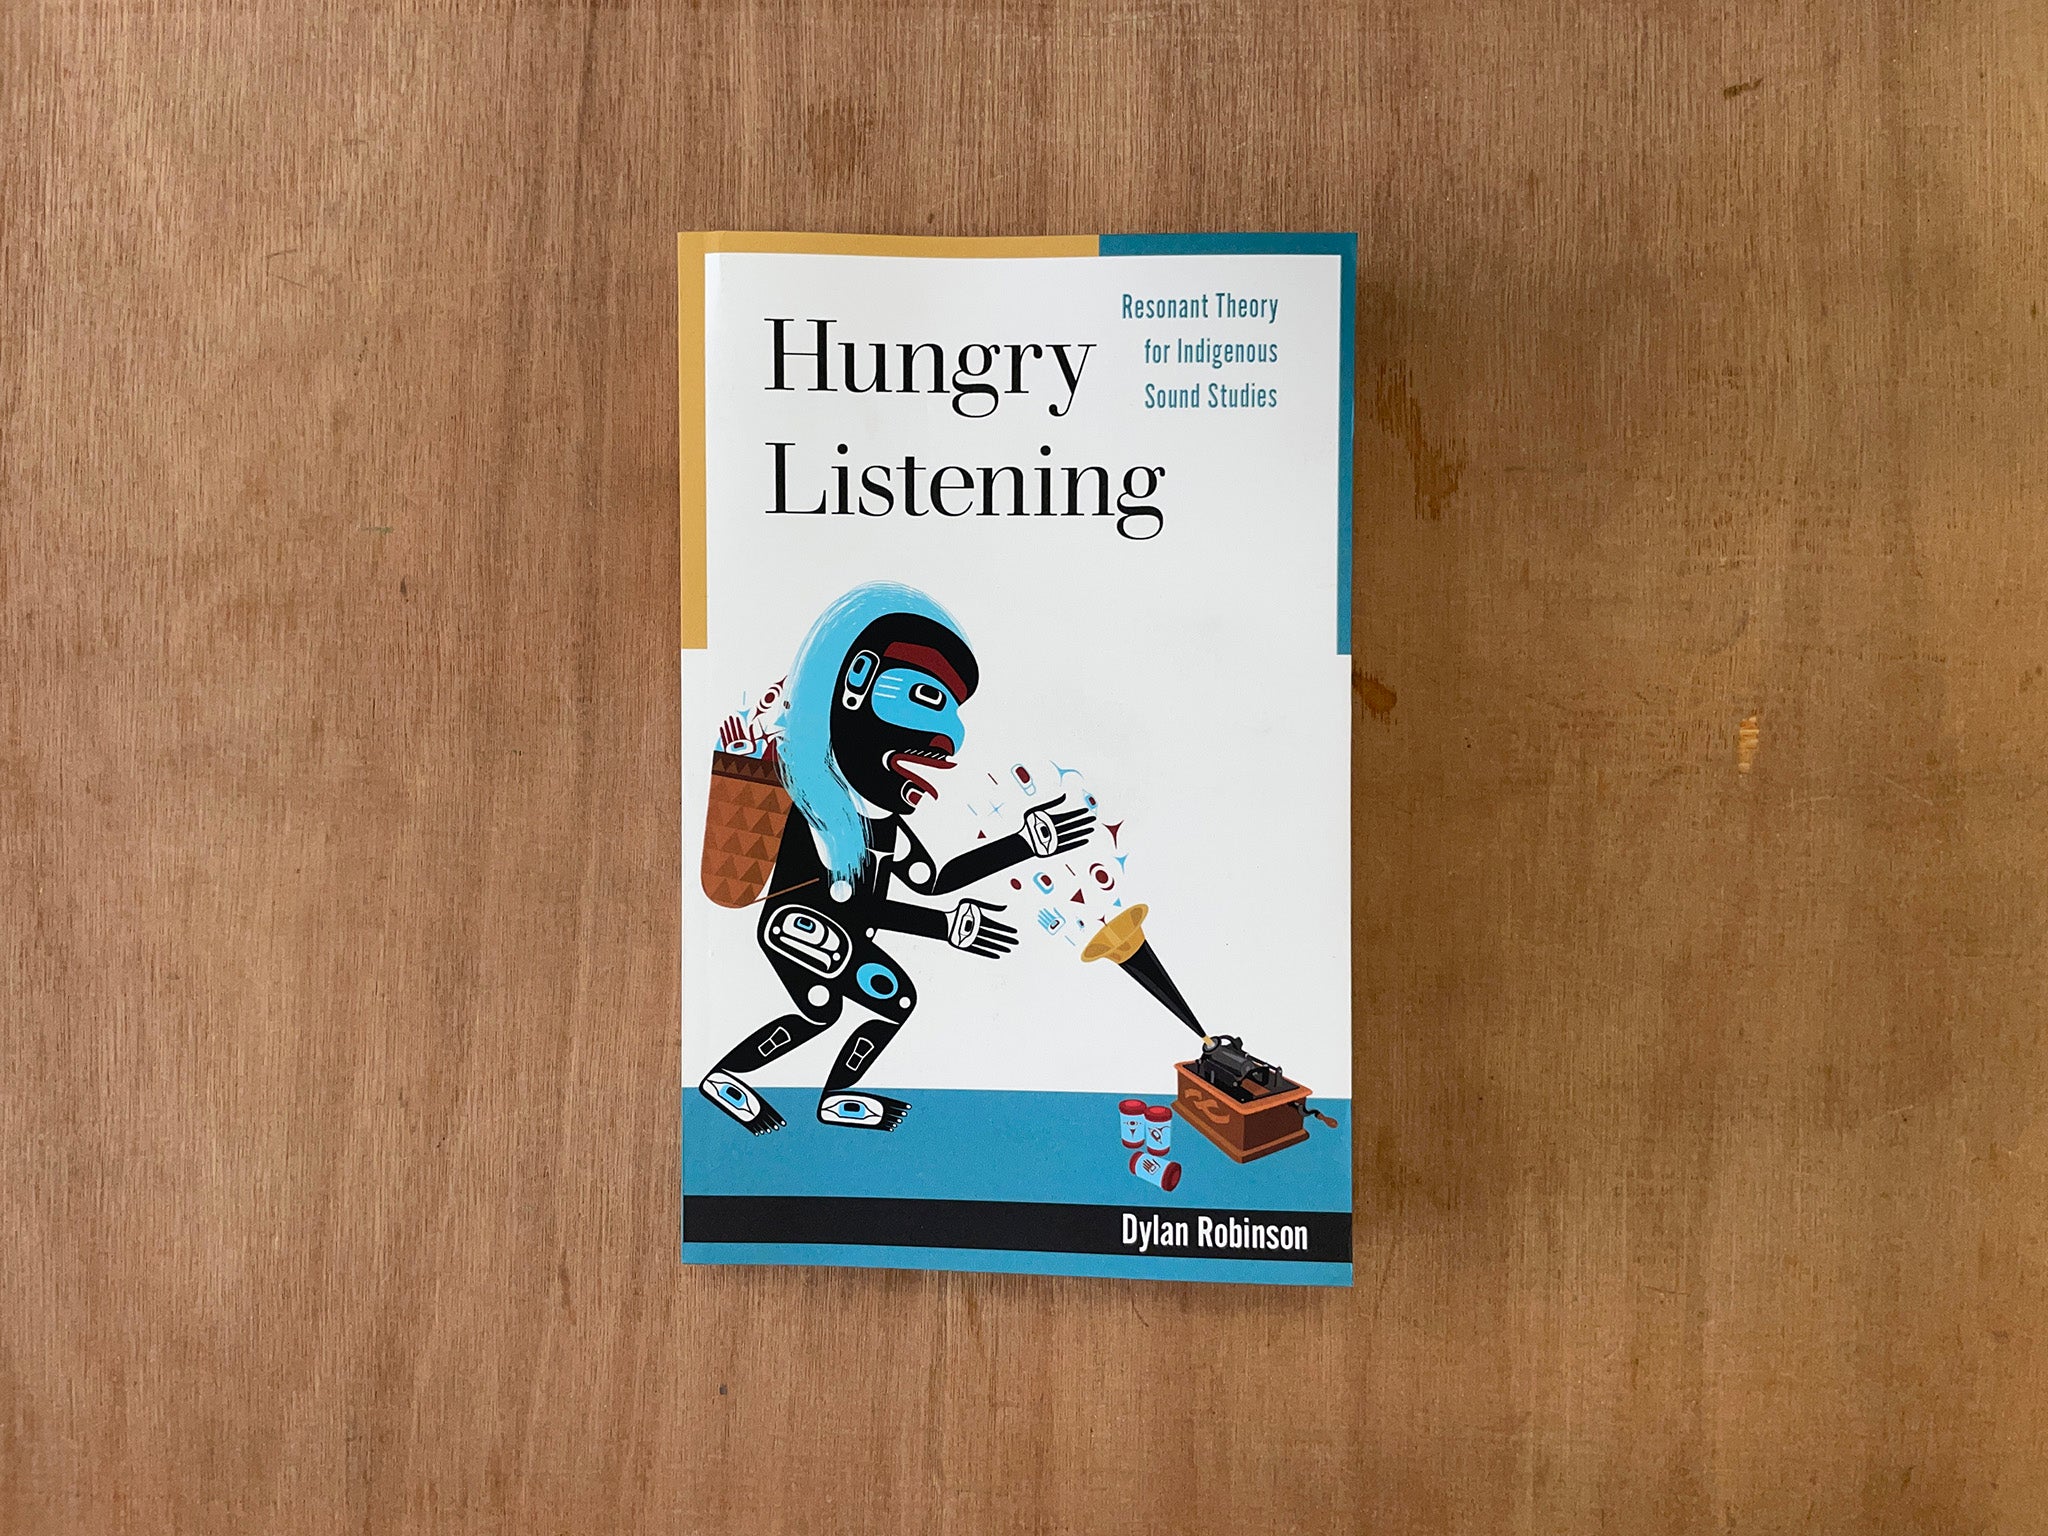 HUNGRY LISTENING: RESONANT THEORY FOR INDIGENOUS SOUND STUDIES by Dylan Robinson